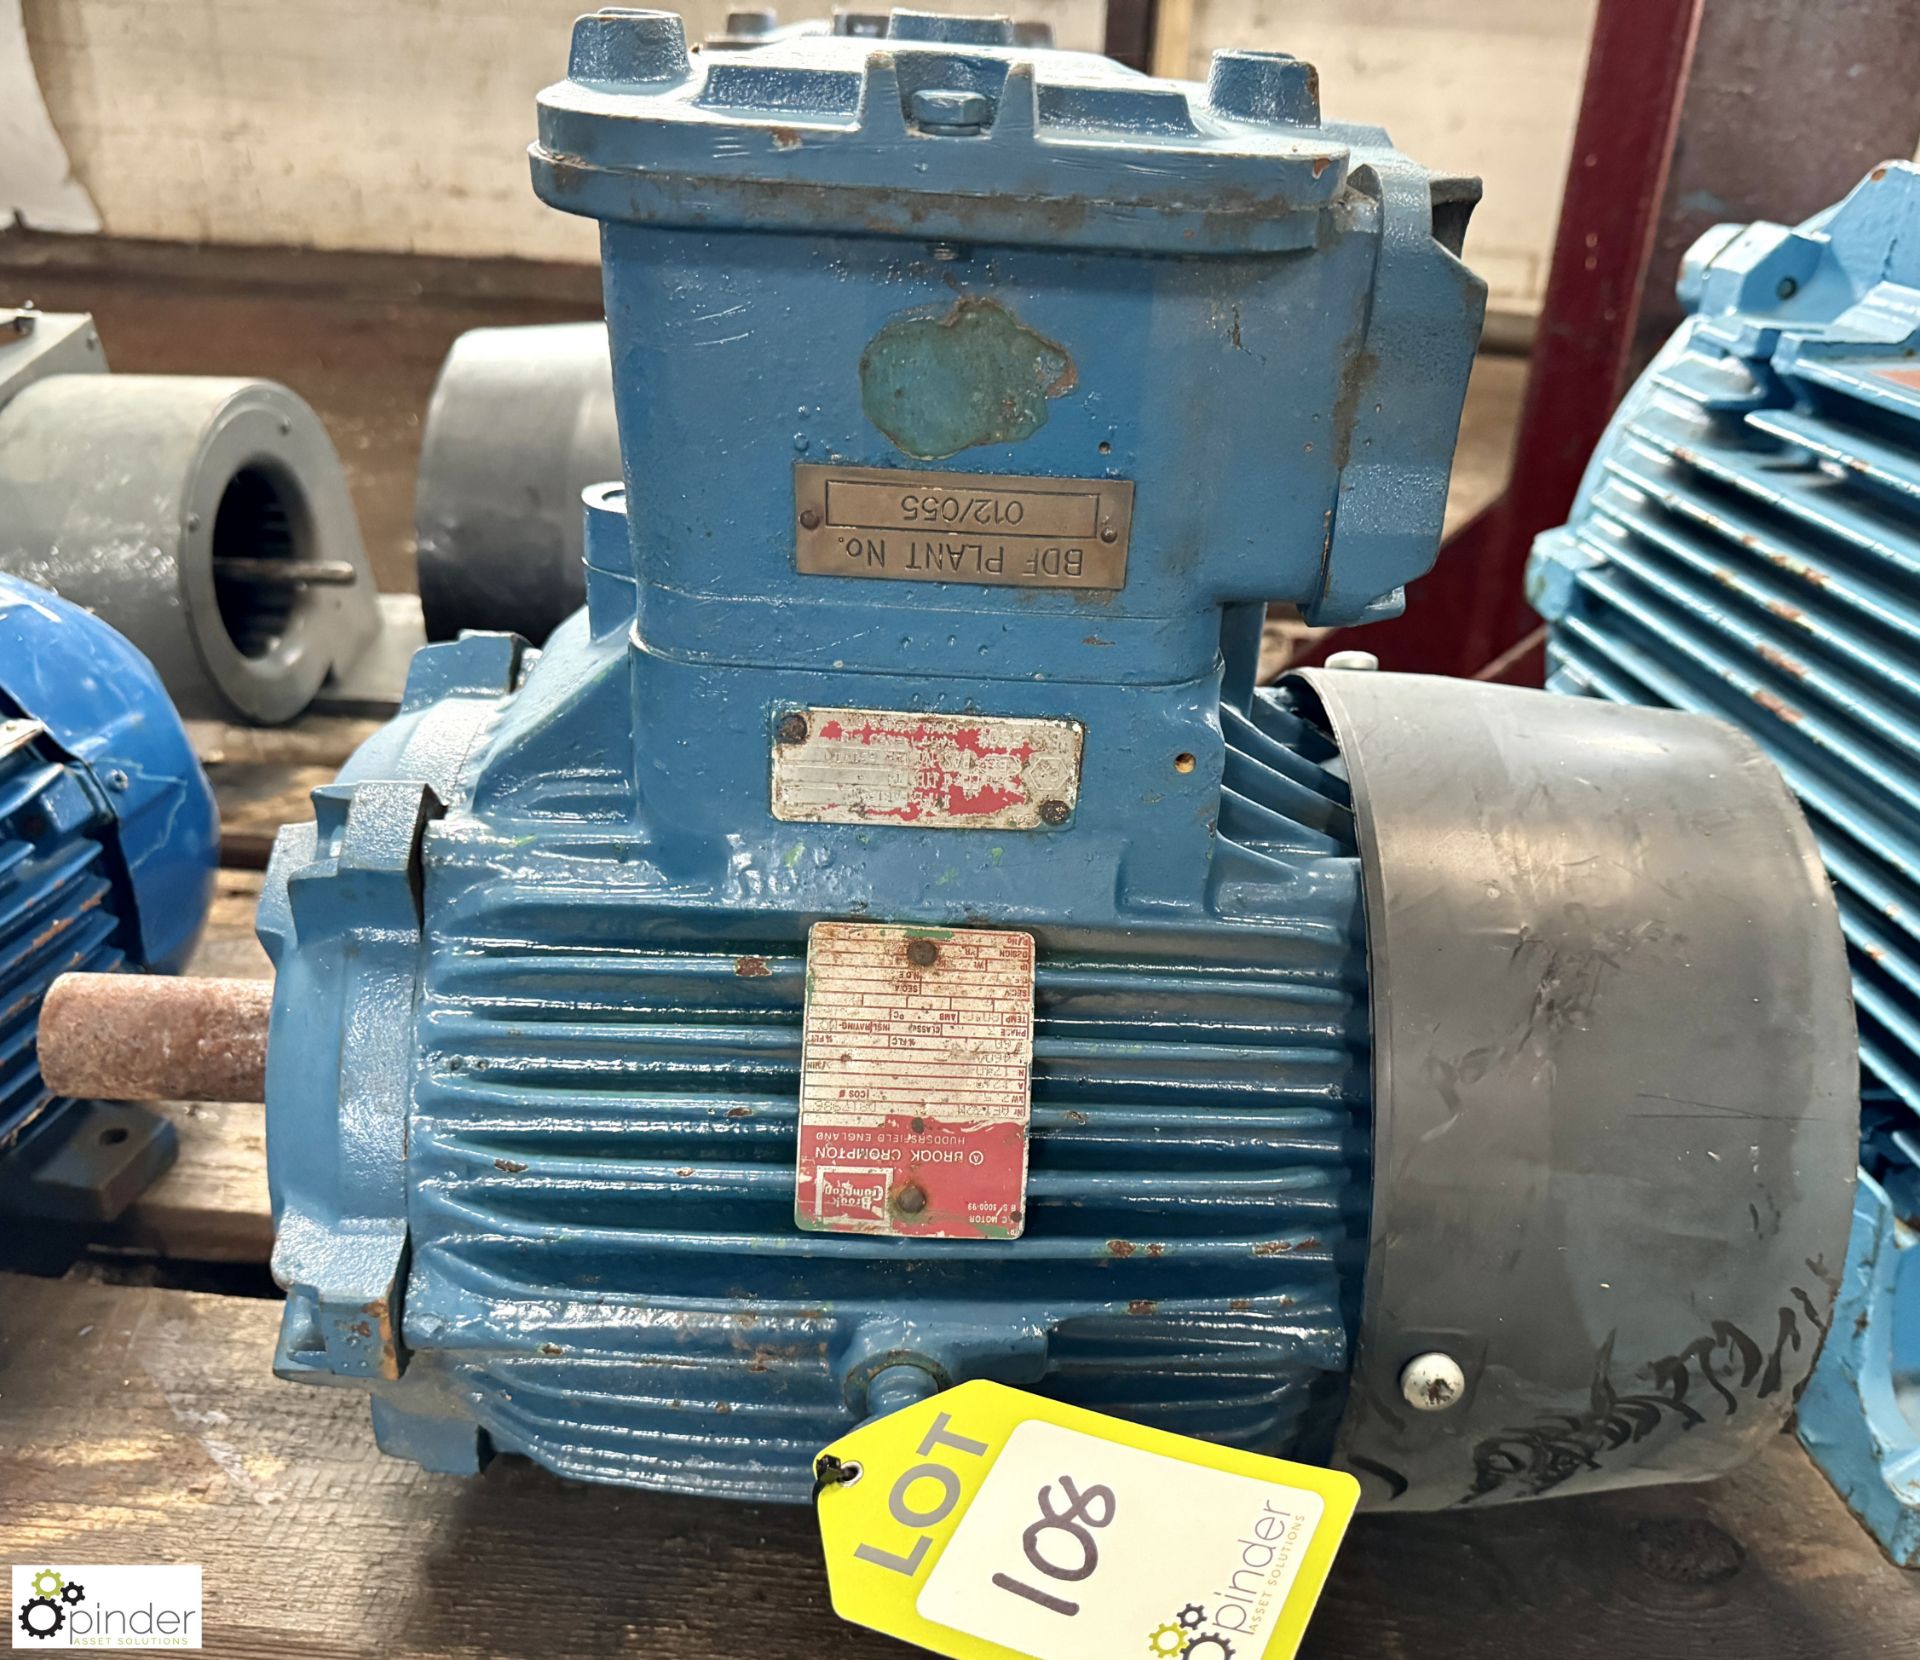 Brook Crompton AE132M Electric Motor, 7.5kw (LOCATION: Nottingham – collection Monday 18 March and